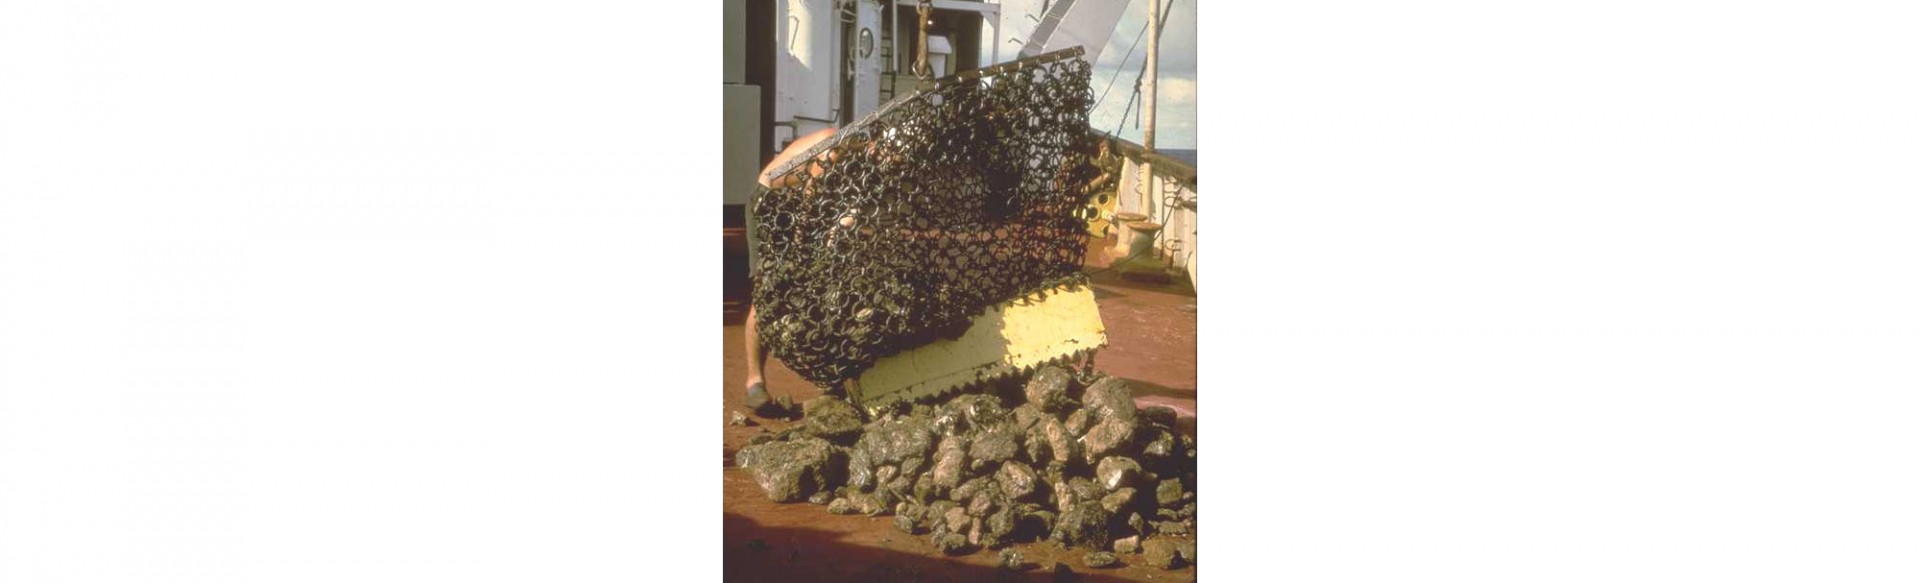 A dredge basket being emptied on the deck of the Research Vessel Vema.